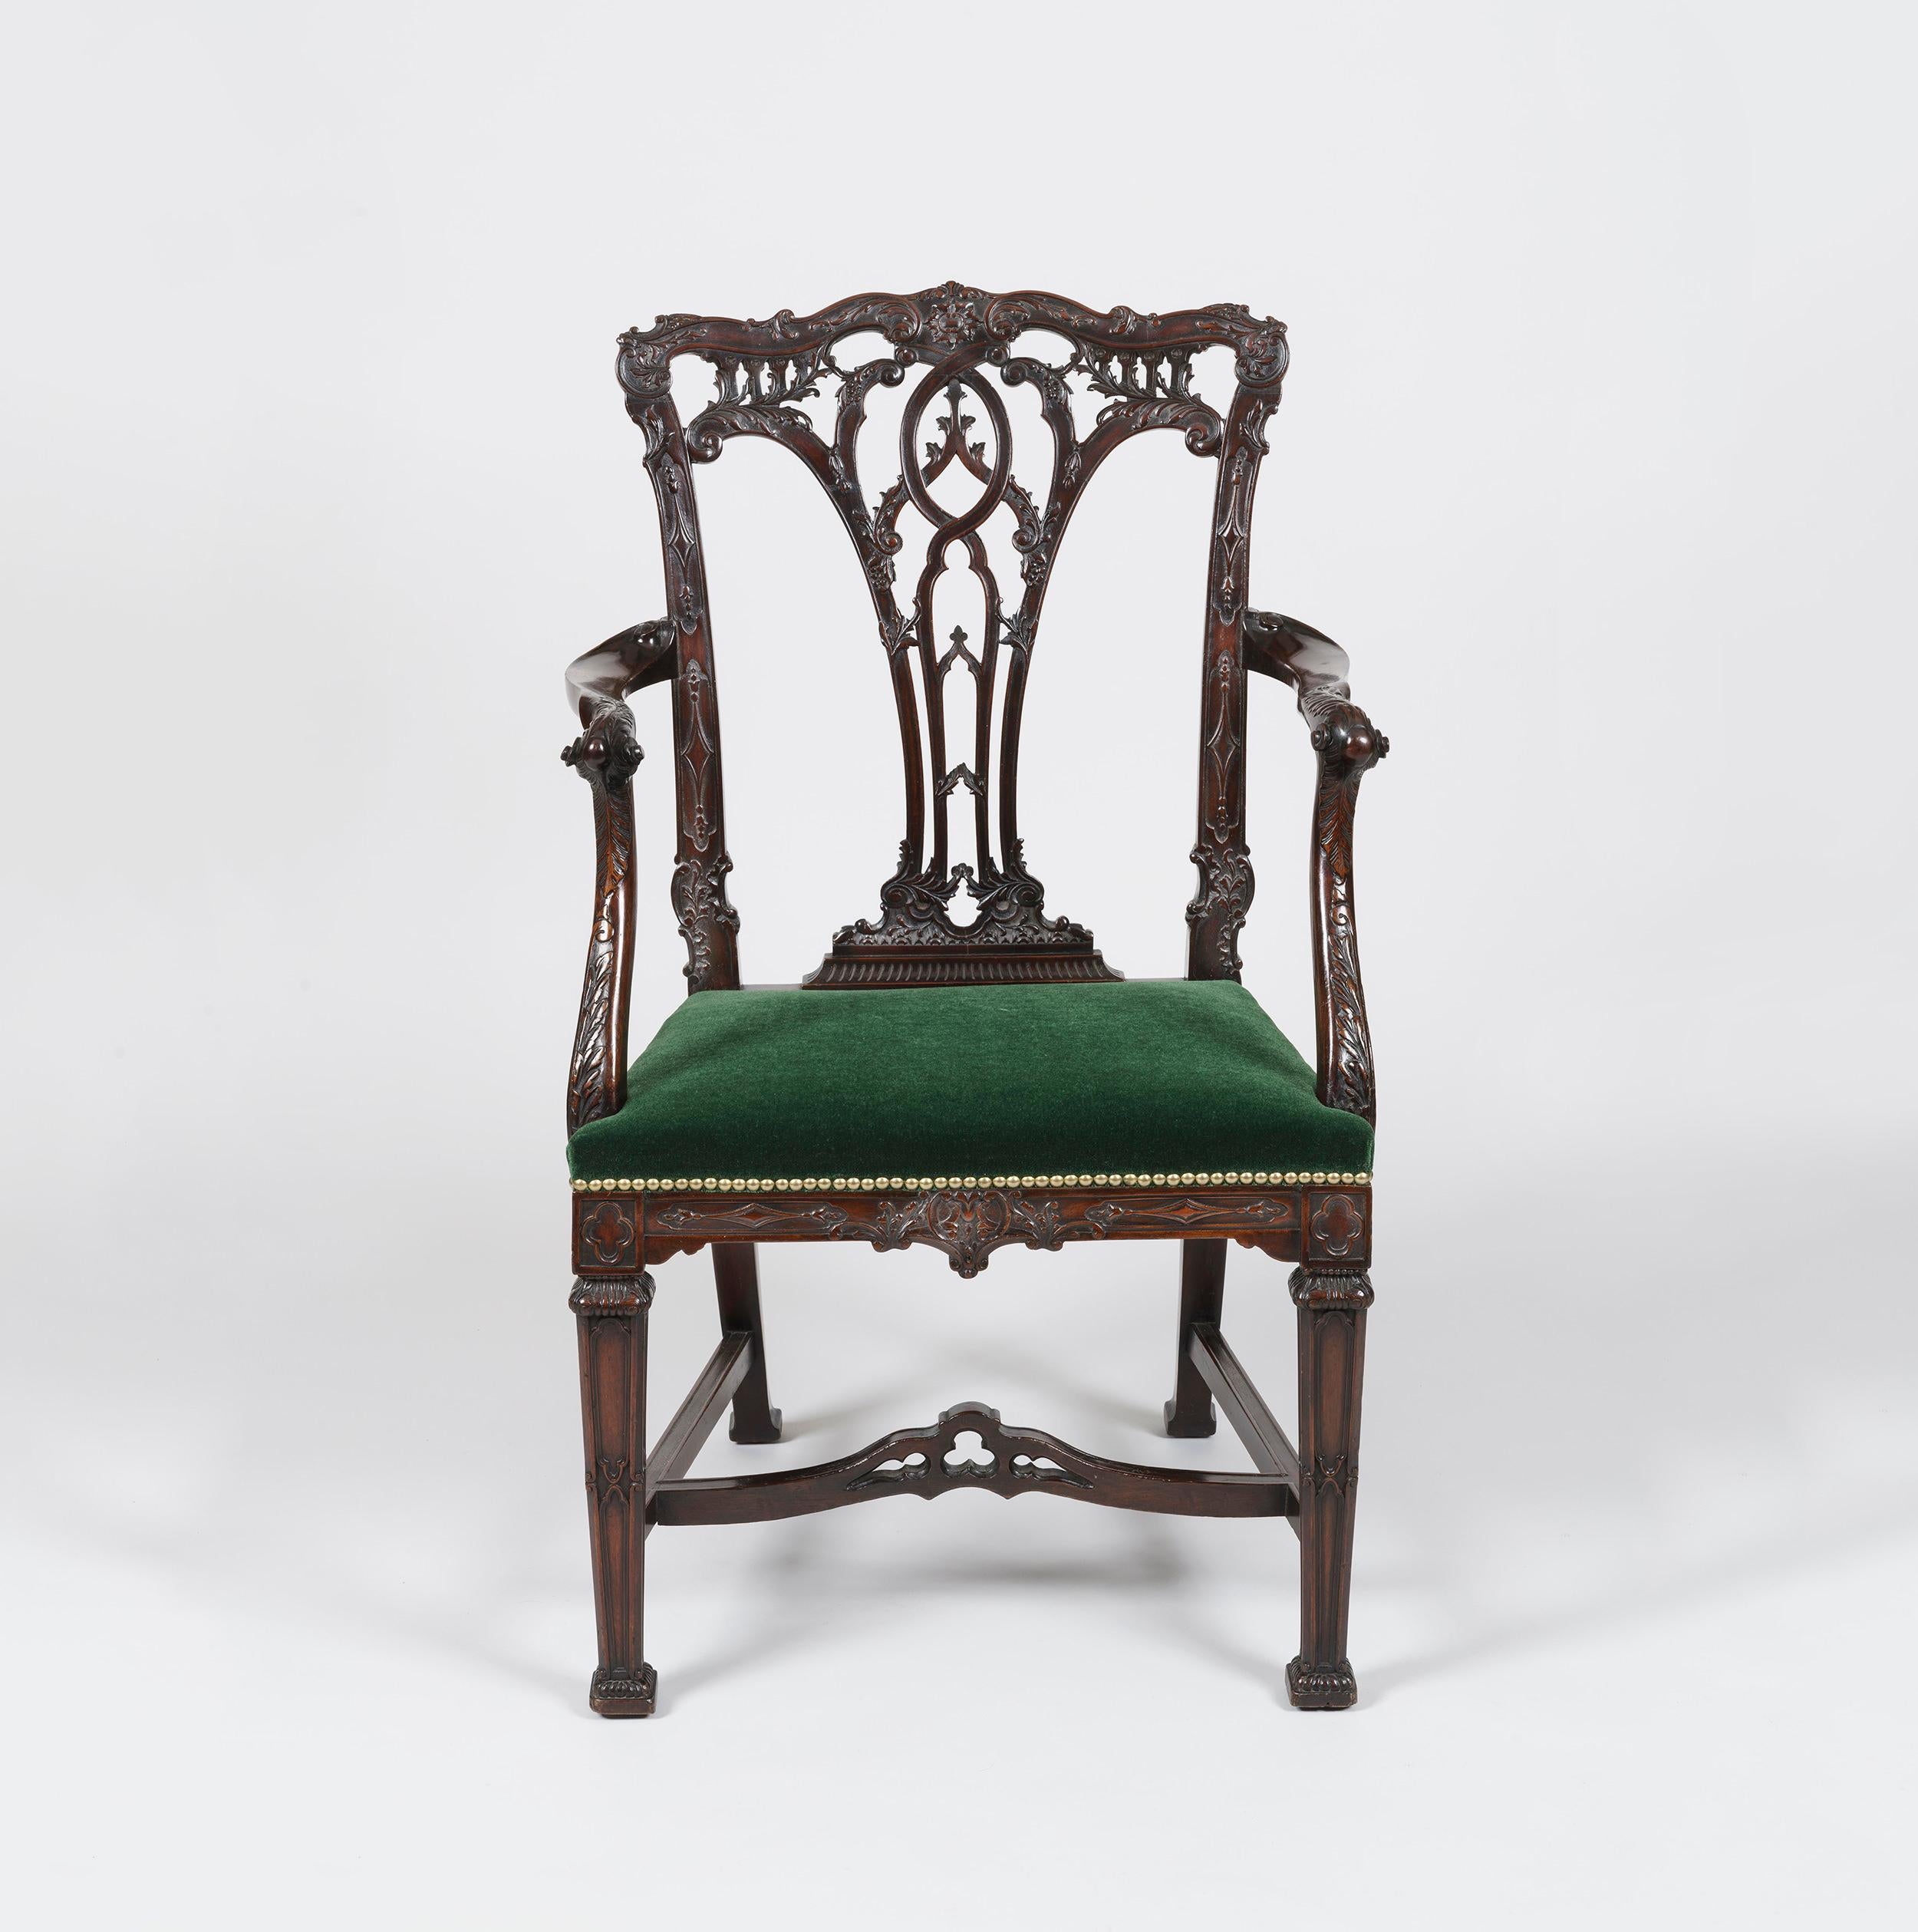 A Fine Armchair in the Manner of Thomas Chippendale

Constructed in richly coloured and crisply carved mahogany, rising from square relief-carved legs having gadrooned terminals and joined with a pierced stretcher to the sabre hind legs. The side